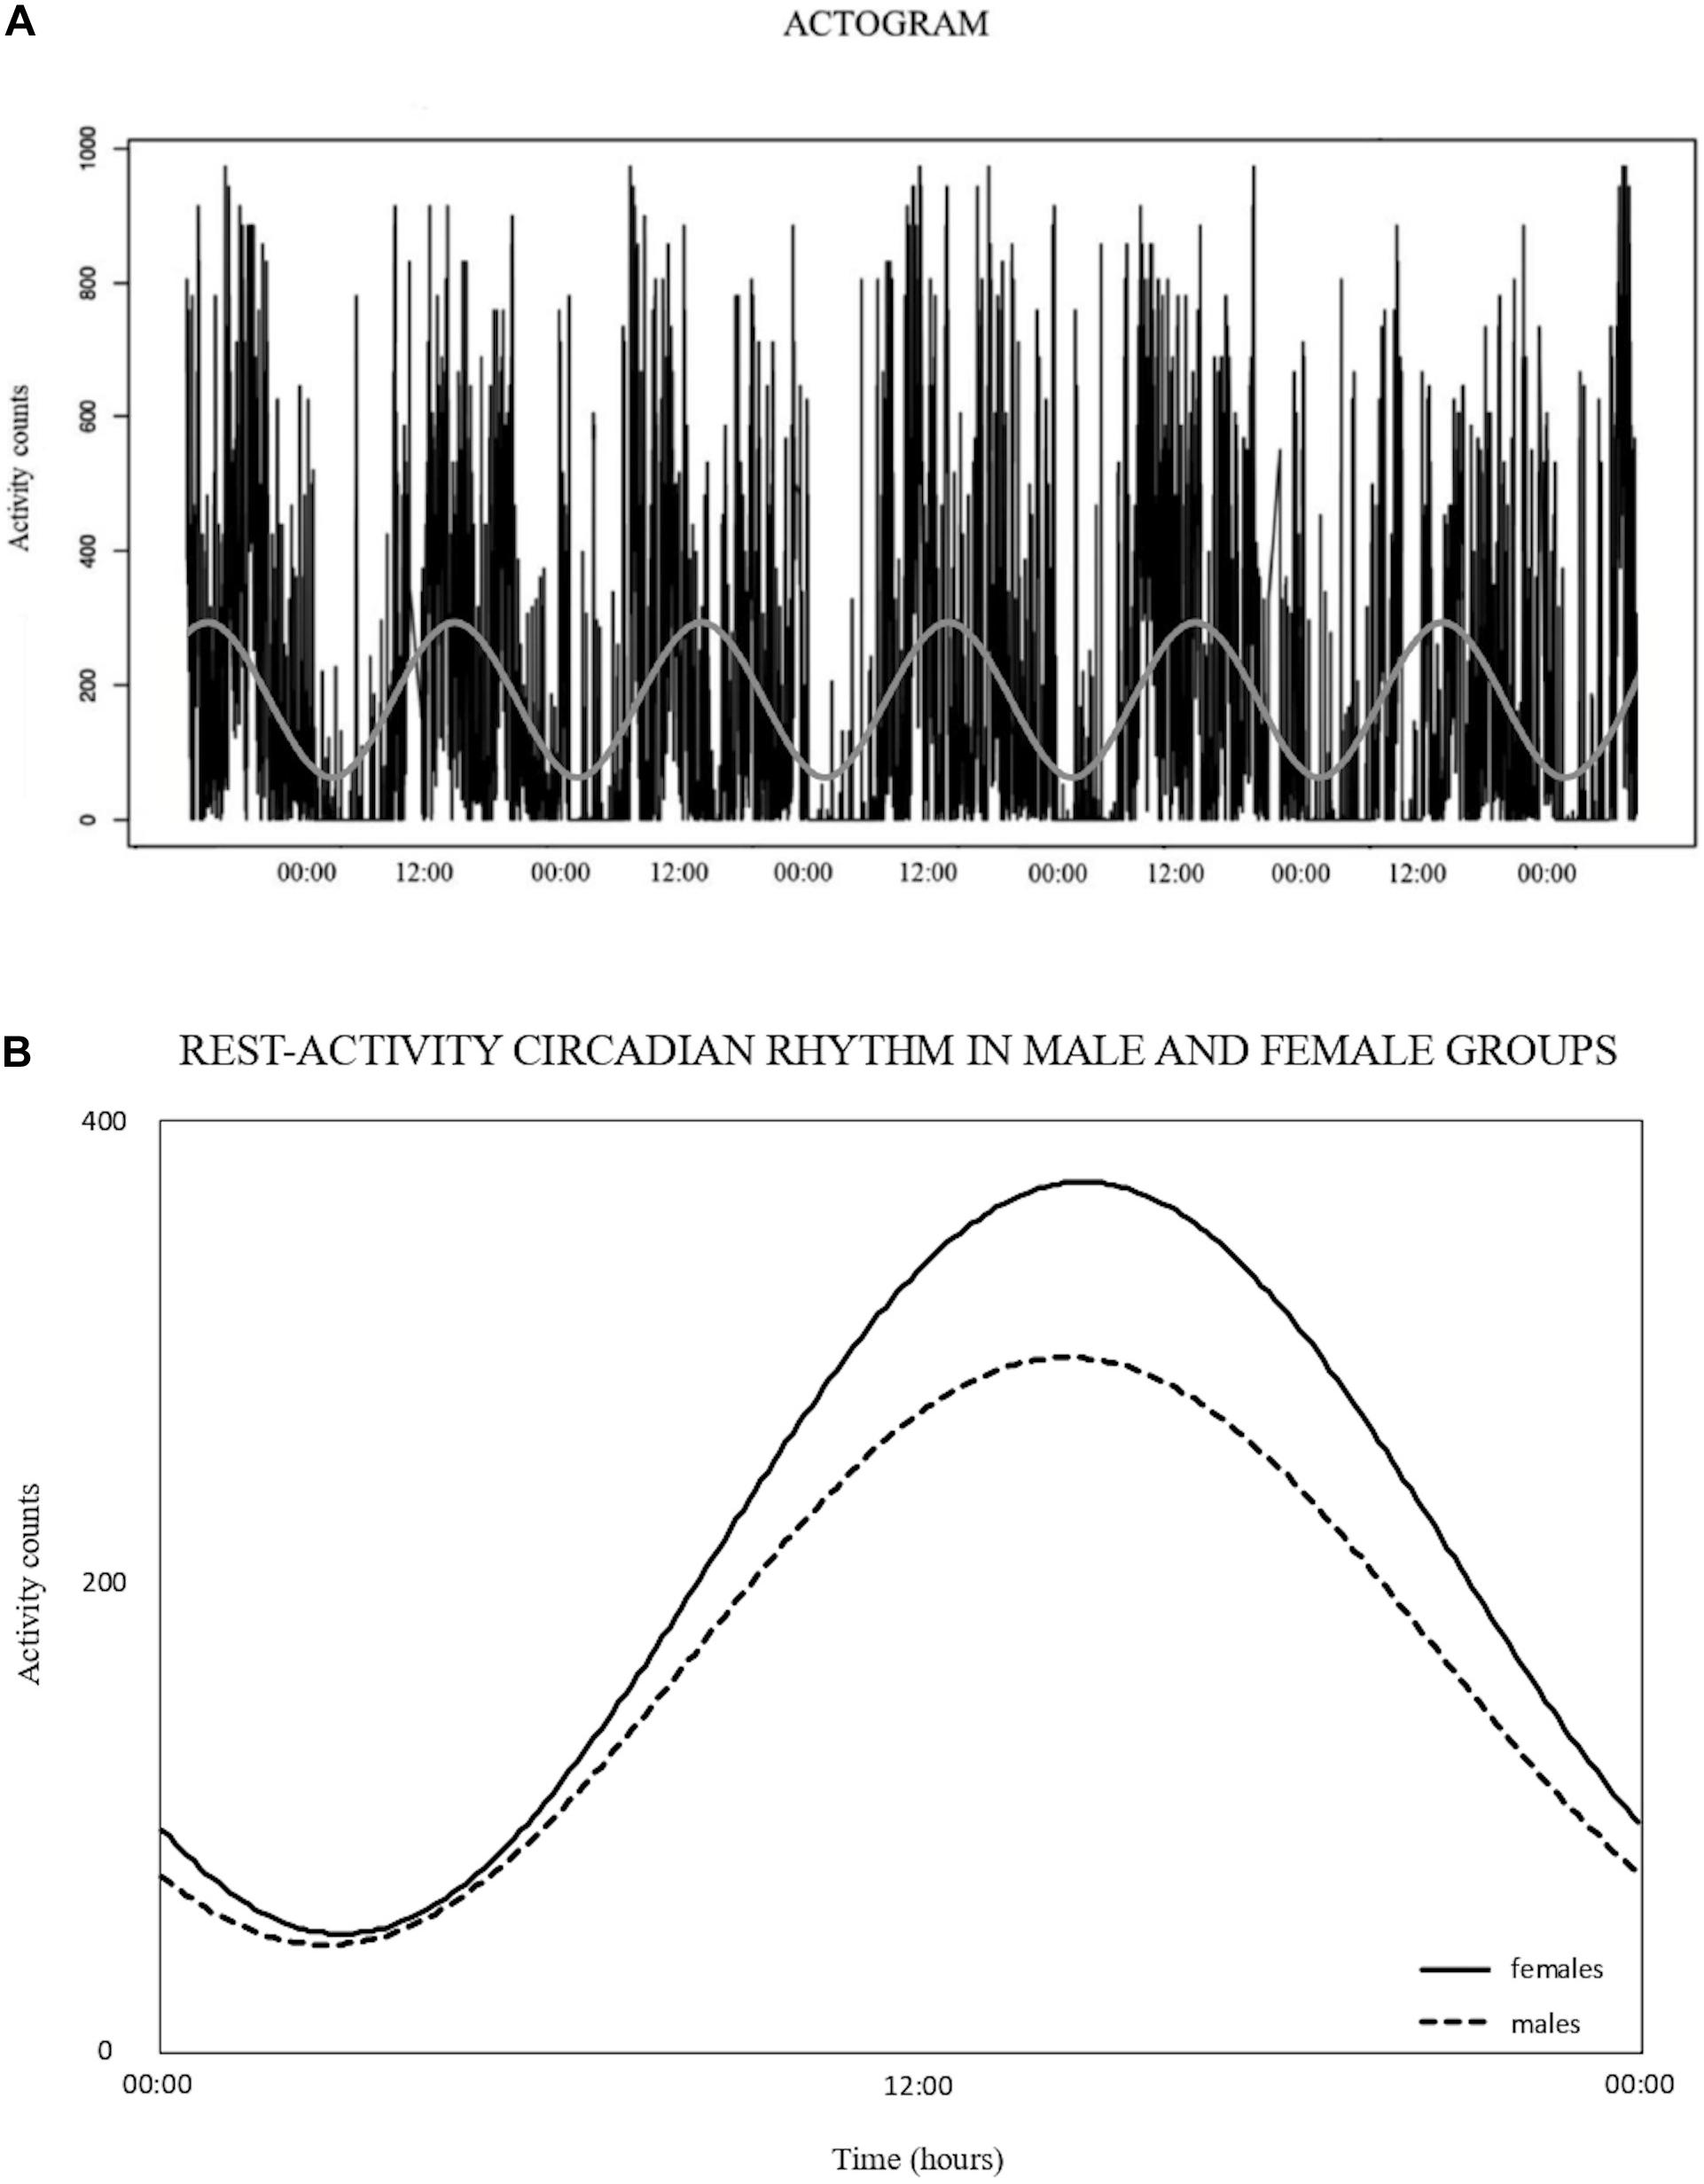 Frontiers Sex Differences In Rest Activity Circadian Rhythm In Patients With Metabolic Syndrome 3953